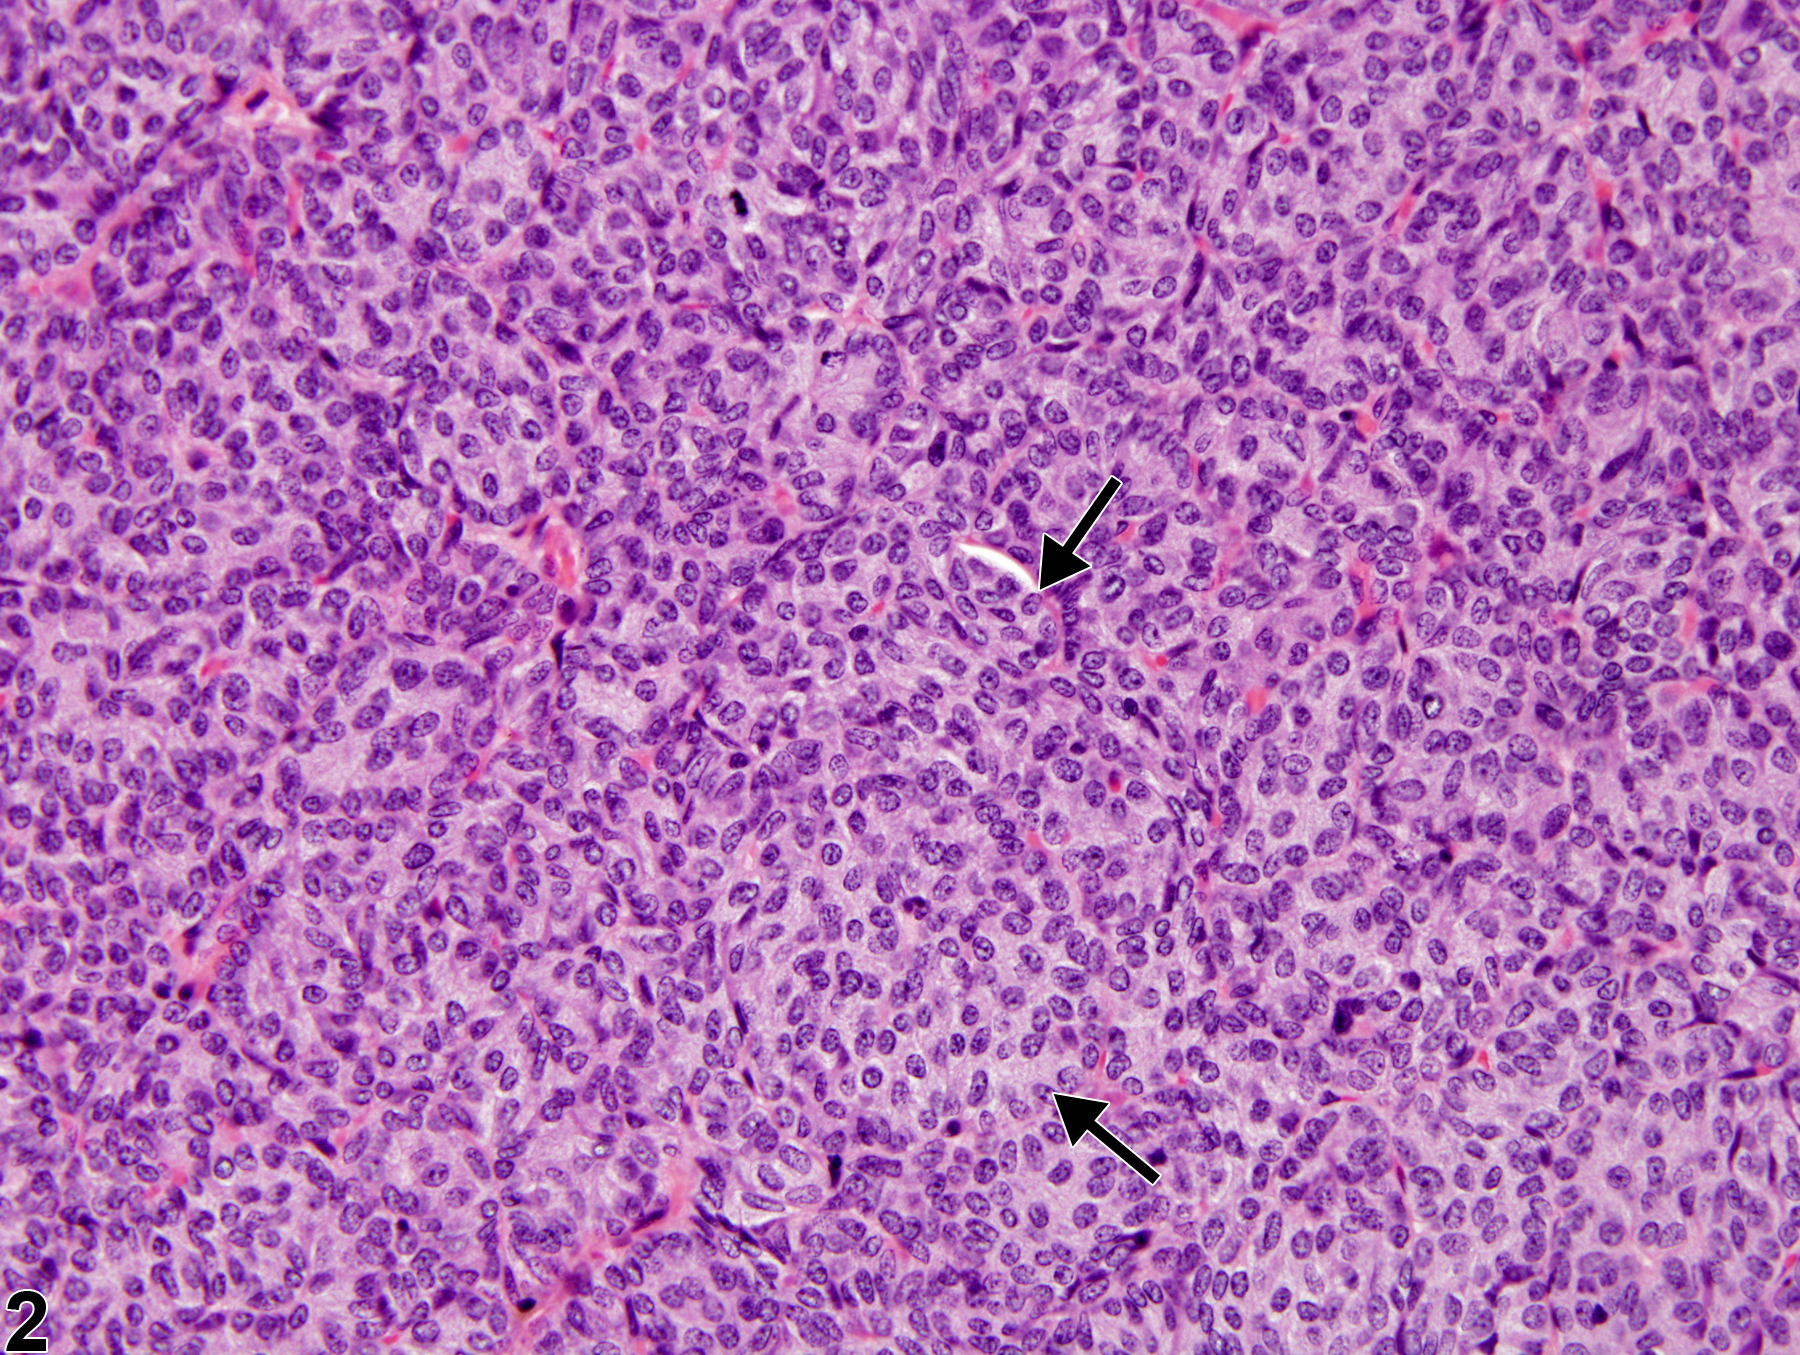 Image of hyperplasia, diffuse in the parathyroid gland from a male F344/N rat in a chronic study